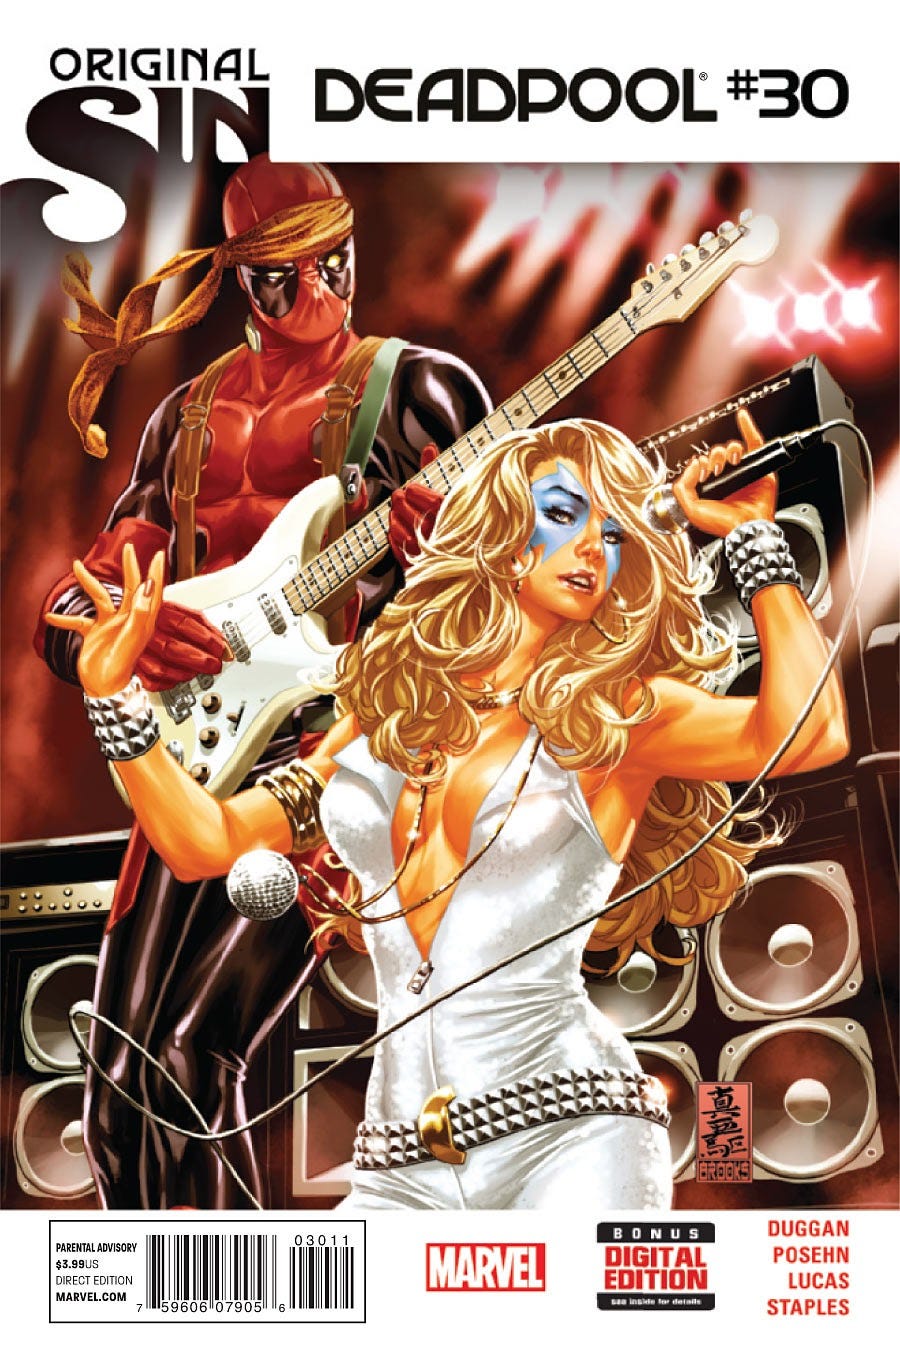 Dazzler and Deadpool on the cover of Deadpool #30 (Original Sin tie-in 2014)